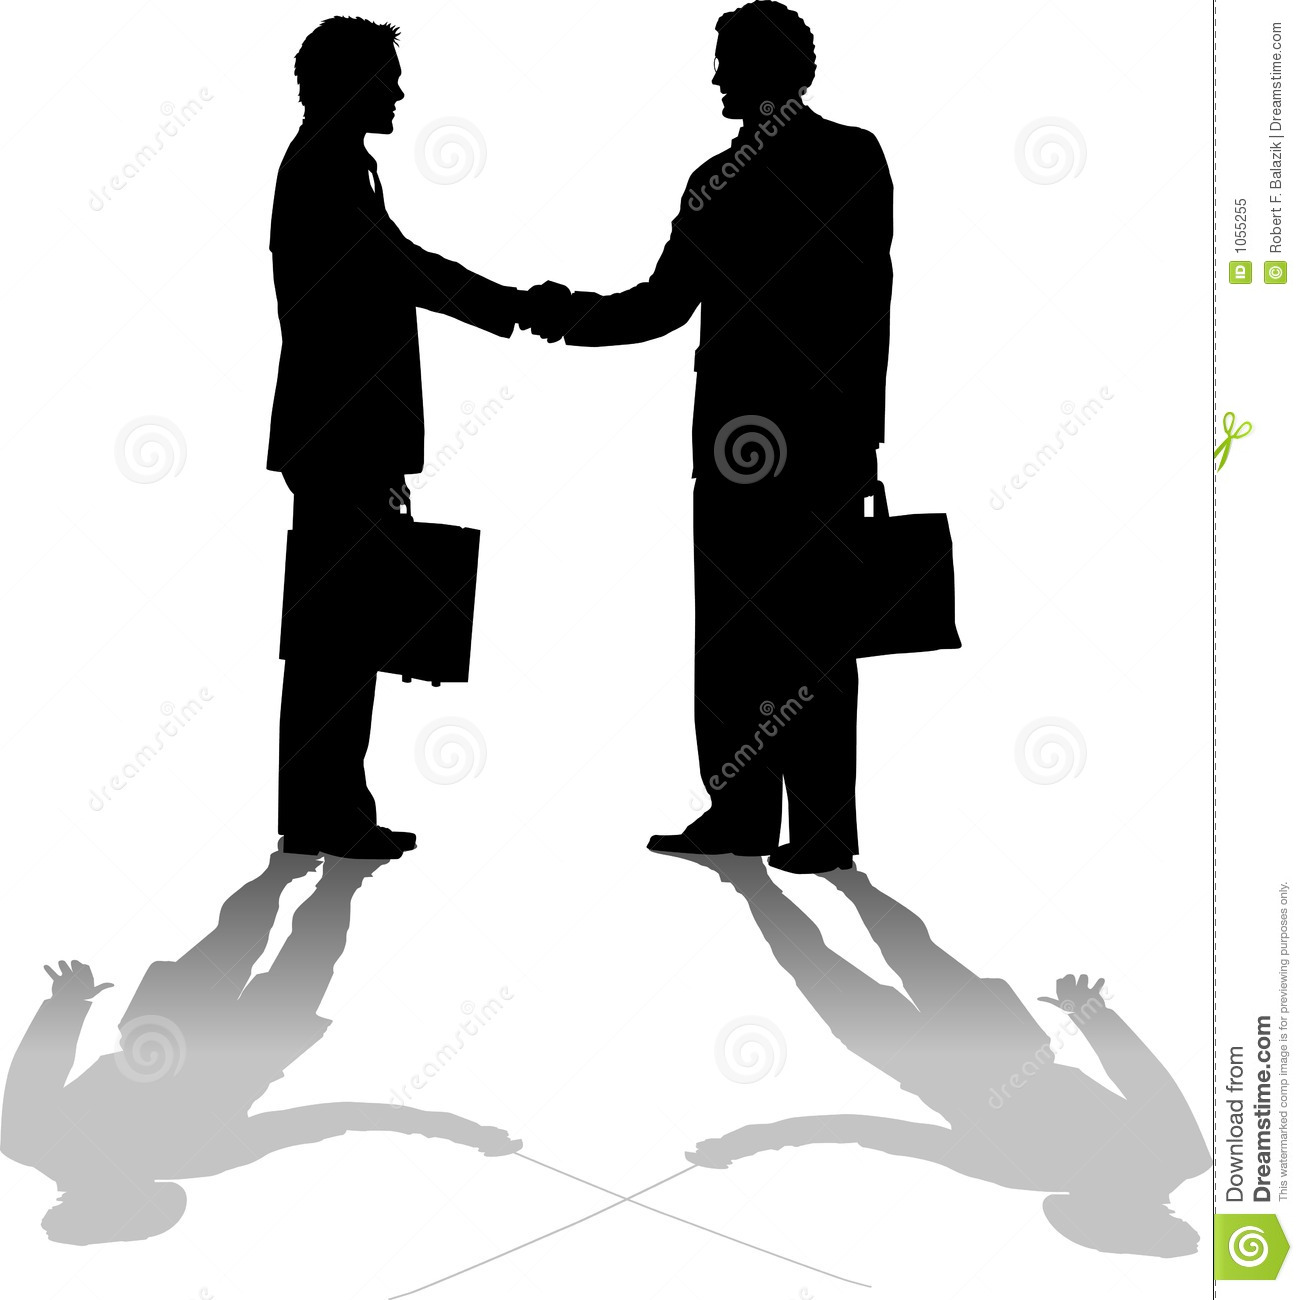 Silhouette Graphic Depicting Two Businessmen Shaking Hands  Concept